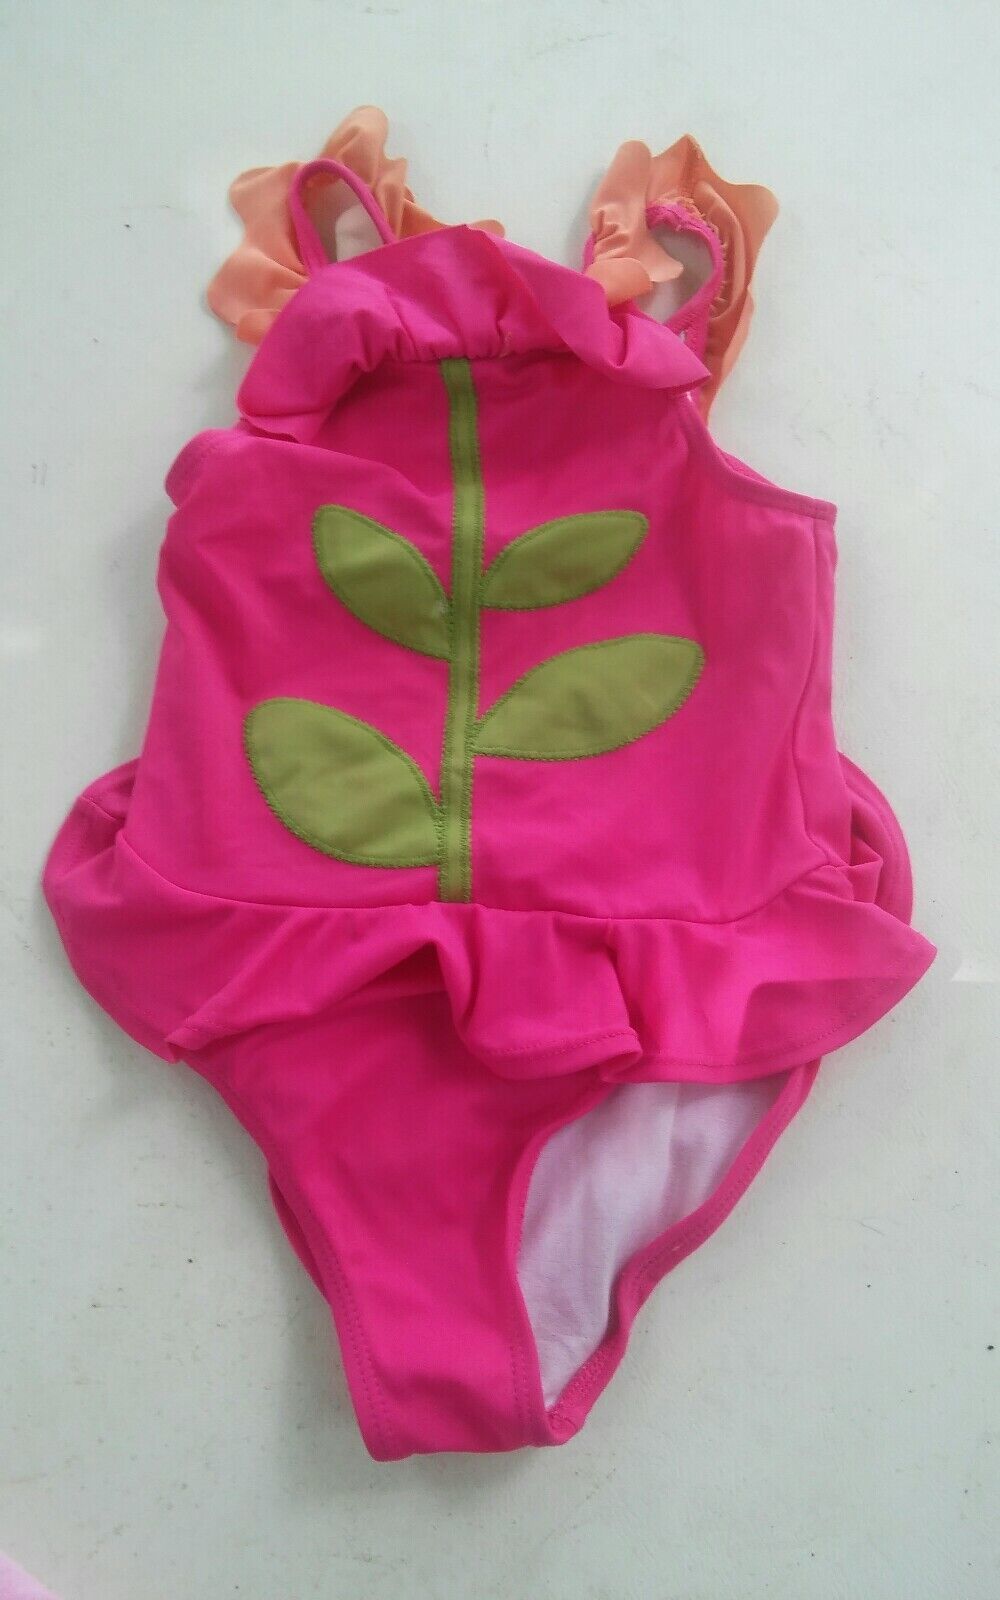 000 Girls Crazy 8 Bathing Suit Swimming 3 Year Plant Floral - $7.91